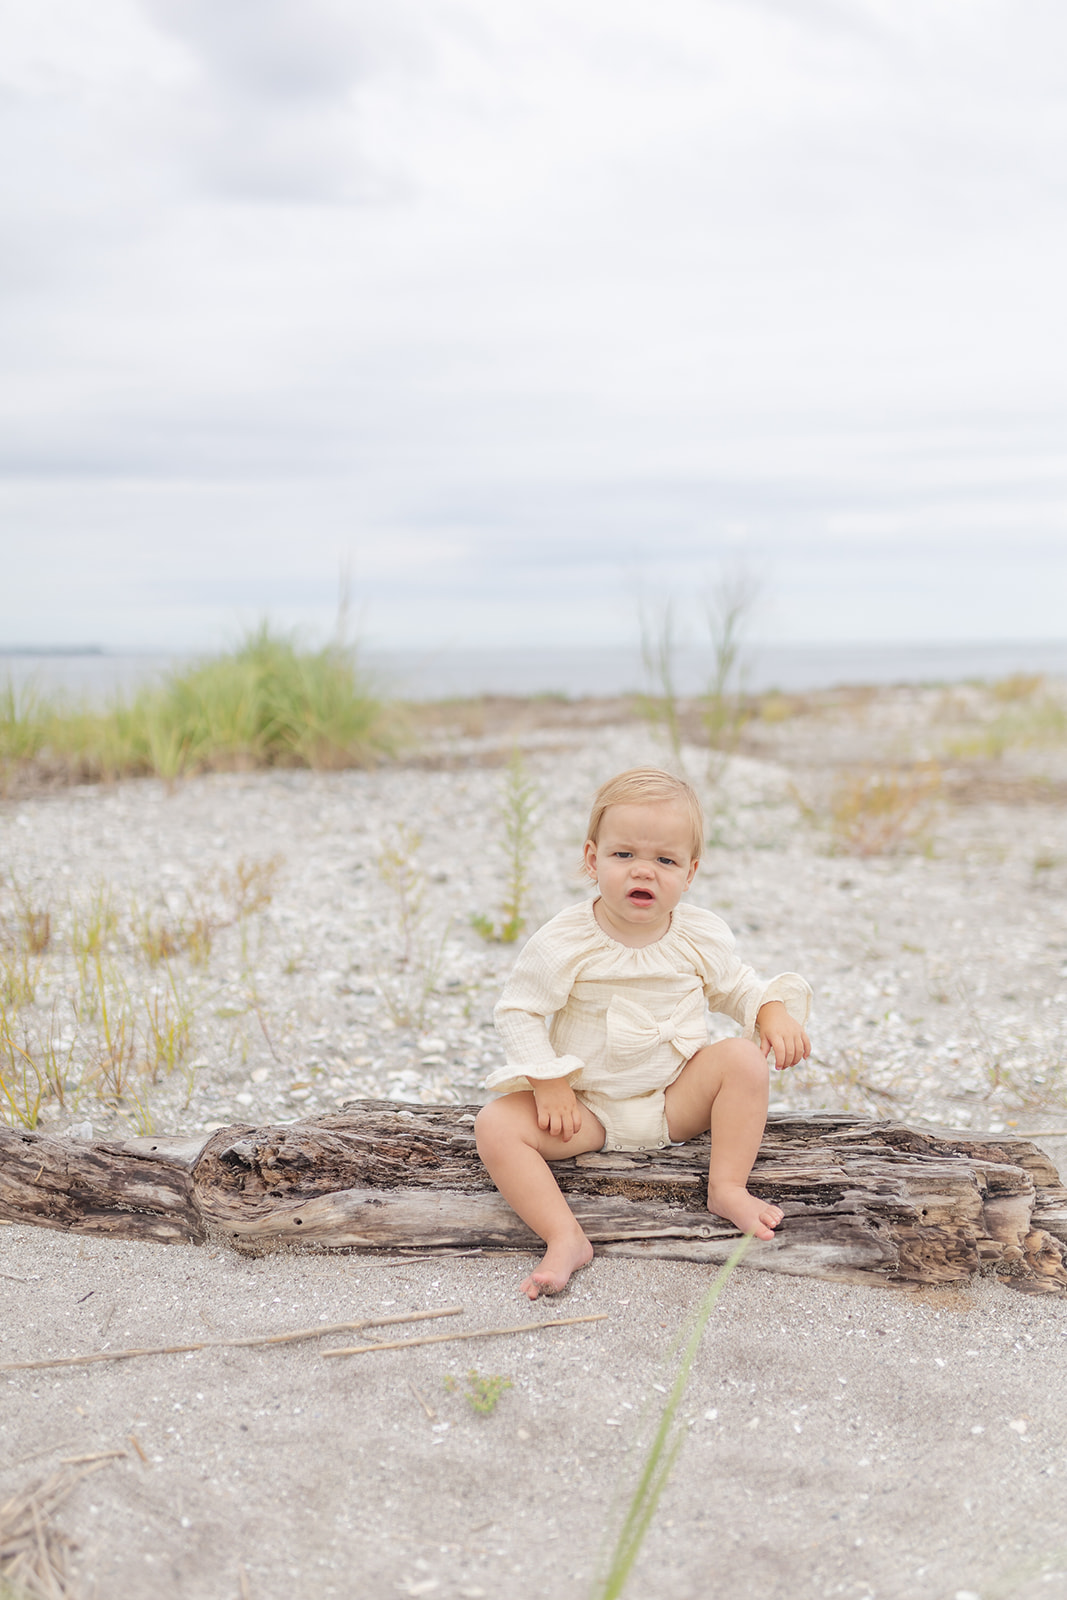 A toddler girl plays while sitting on a piece of driftwood on a beach